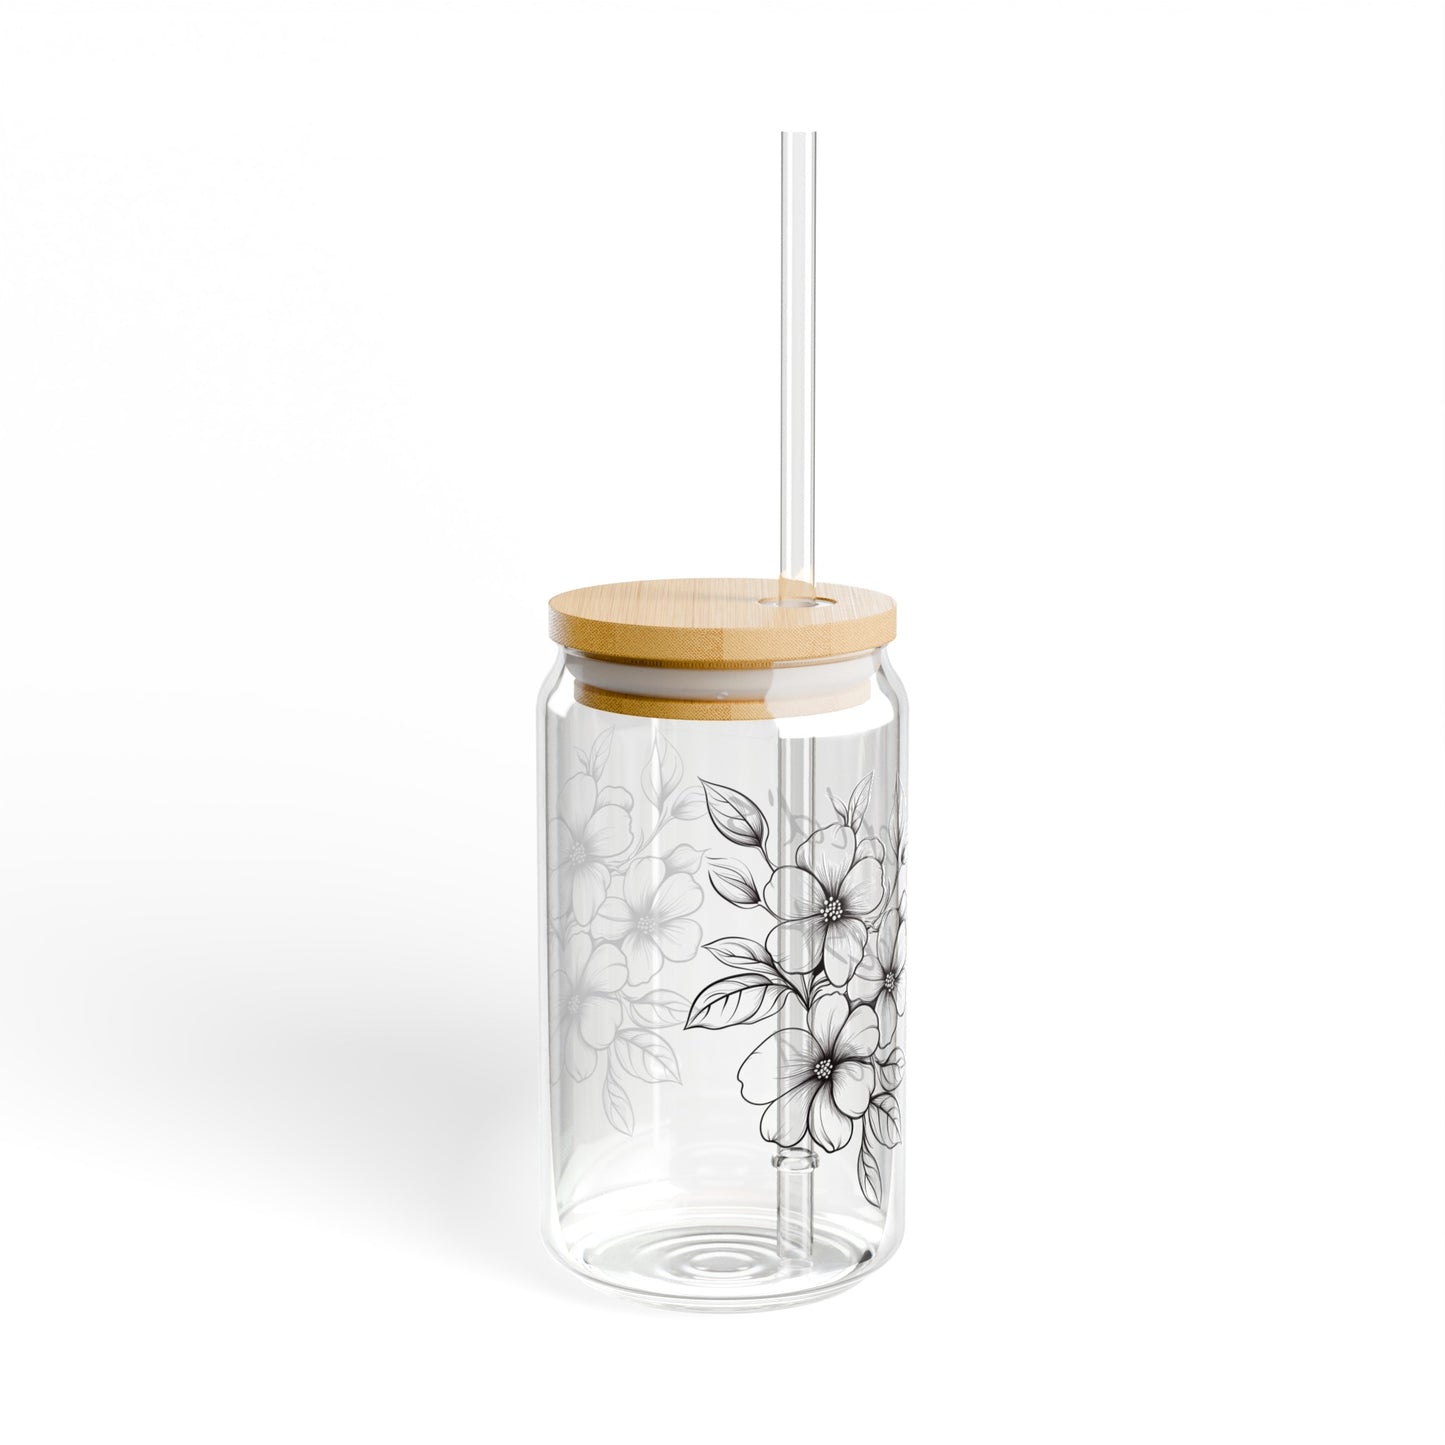 Happy Mother's Day Sipper Glass / Glass Tumbler Transparent Floral Pattern and Flowers - "World's best mom", 16oz (0,473 l) - Perfect Gift